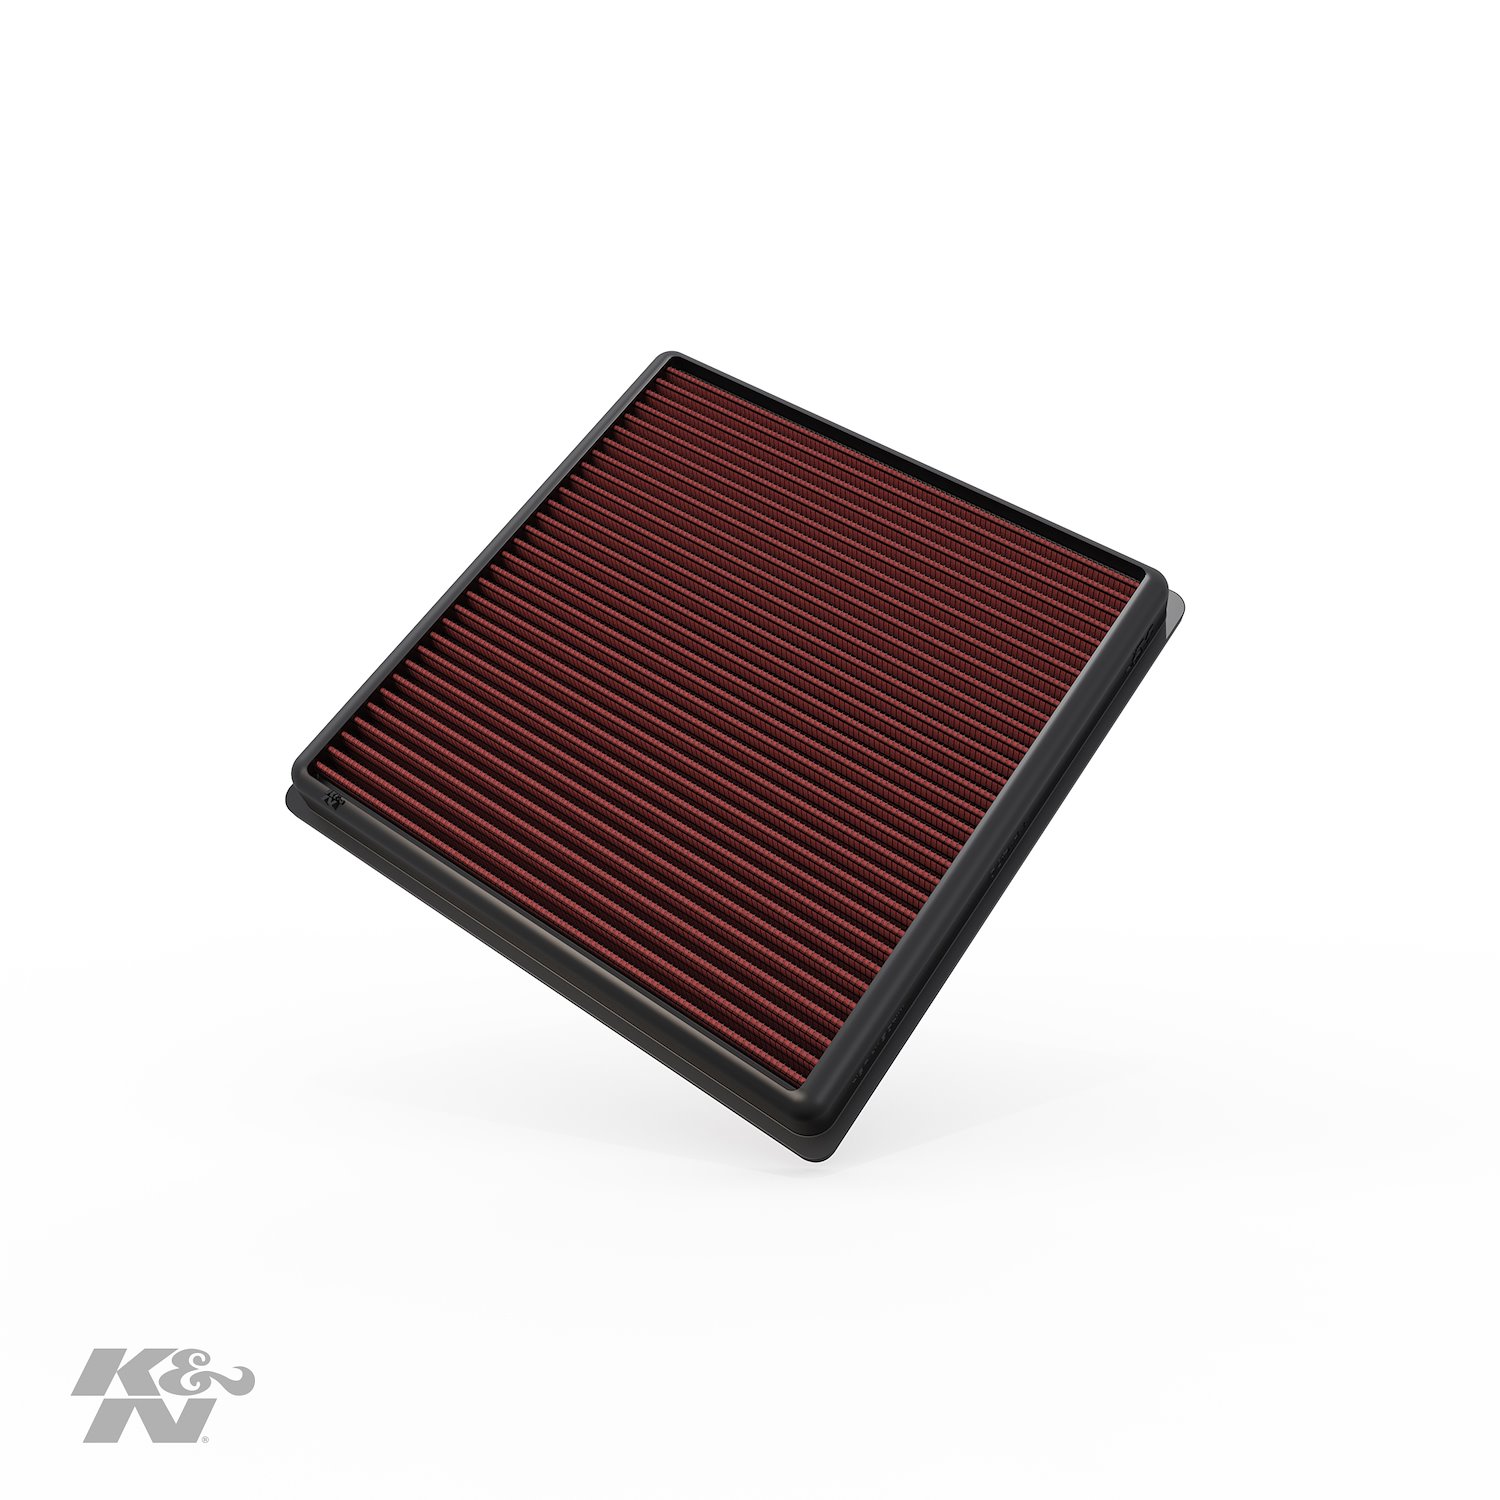 K&N High-Performance OE-Style Replacement Filters